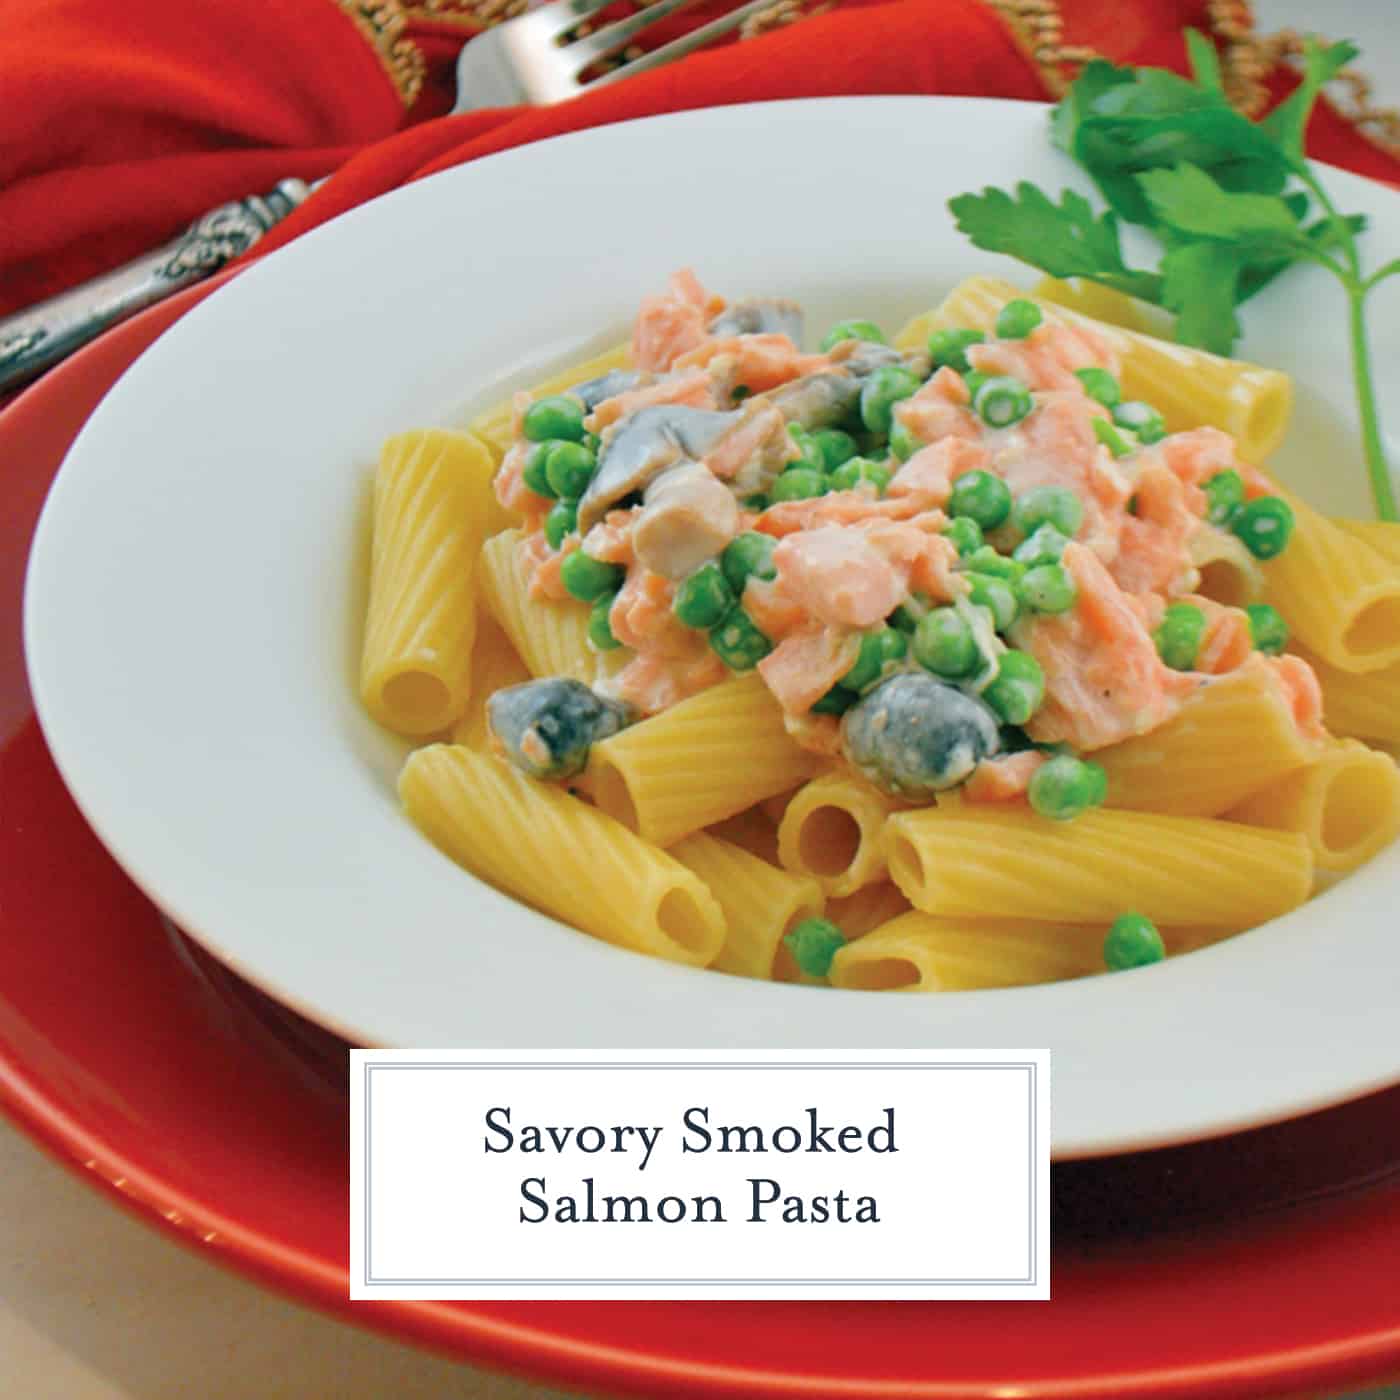 This Smoked Salmon Pasta recipe is a new way to use smoked salmon! You can prepare a delicious dinner in just 25 minutes with only a handful of ingredients. #smokedsalmonpasta #salmonpastarecipe www.savoryexperiments.com